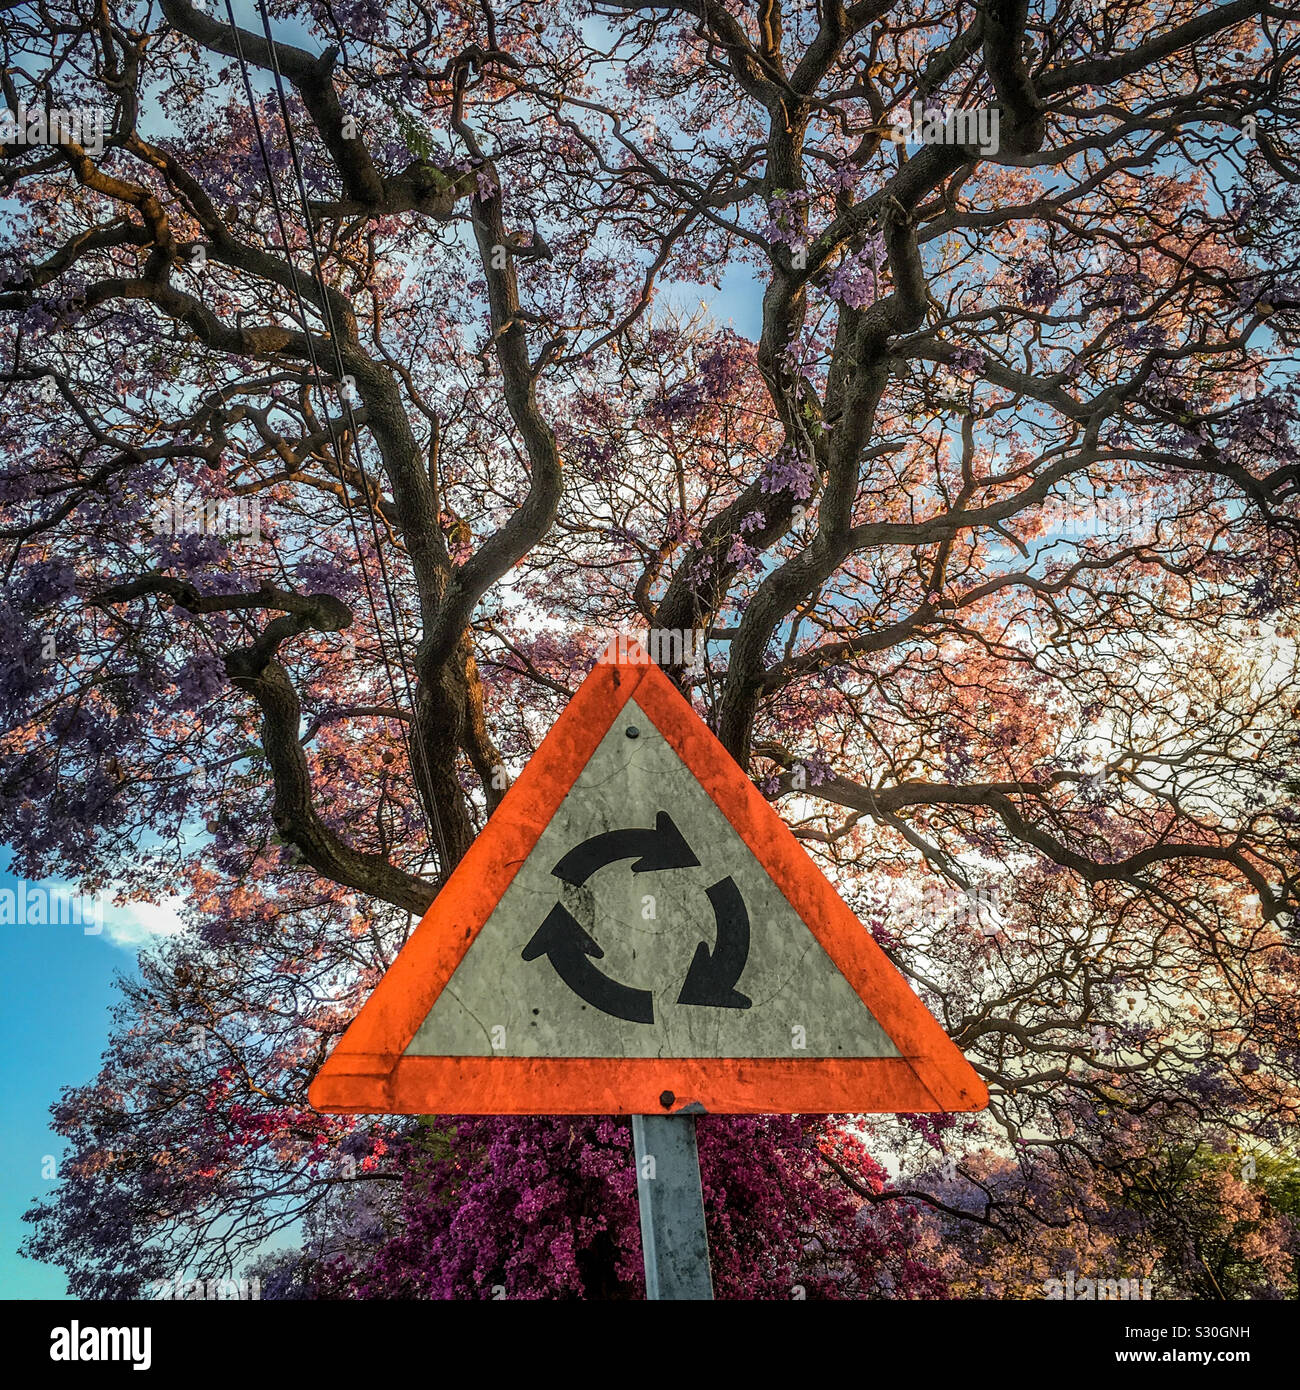 Warning sign for traffic circle / Roundabout in Melville, Johannesburg, South Africa. Purple flowers of jacaranda trees behind. 2016. Stock Photo